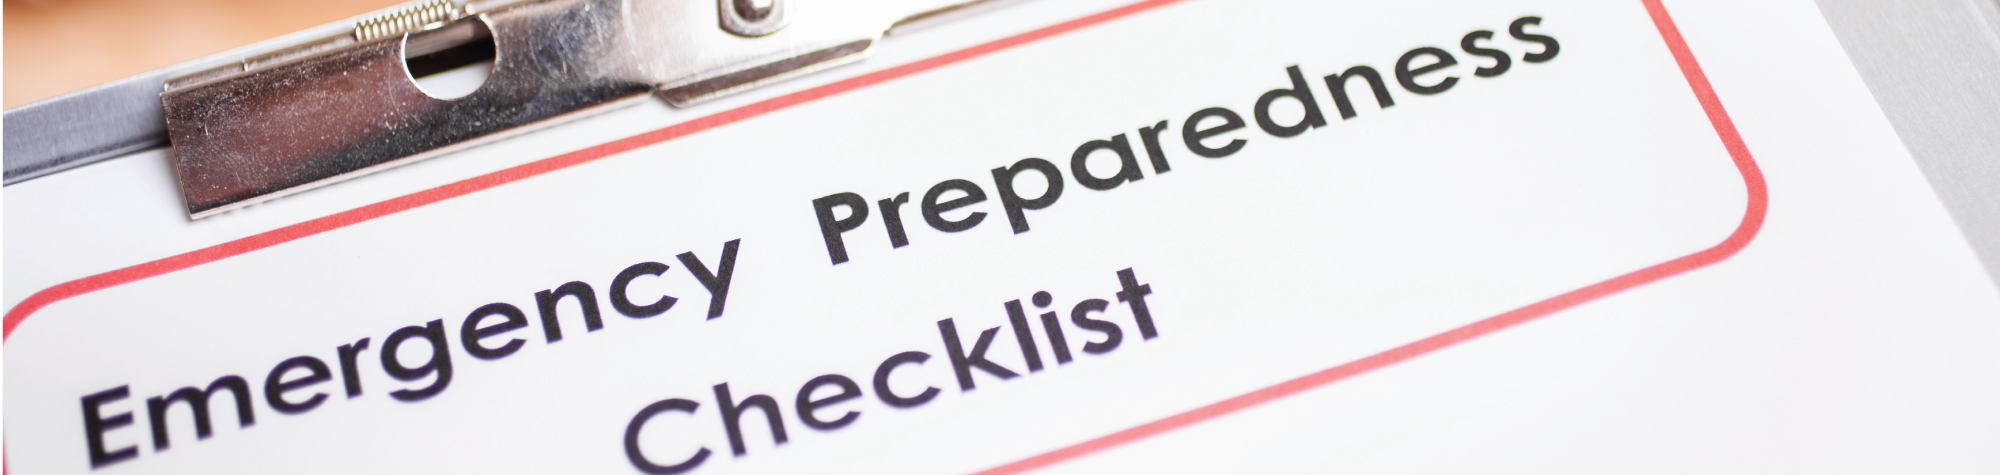 Hurricane Season: Have You Reviewed Your In-Case-of-Emergency Plan?